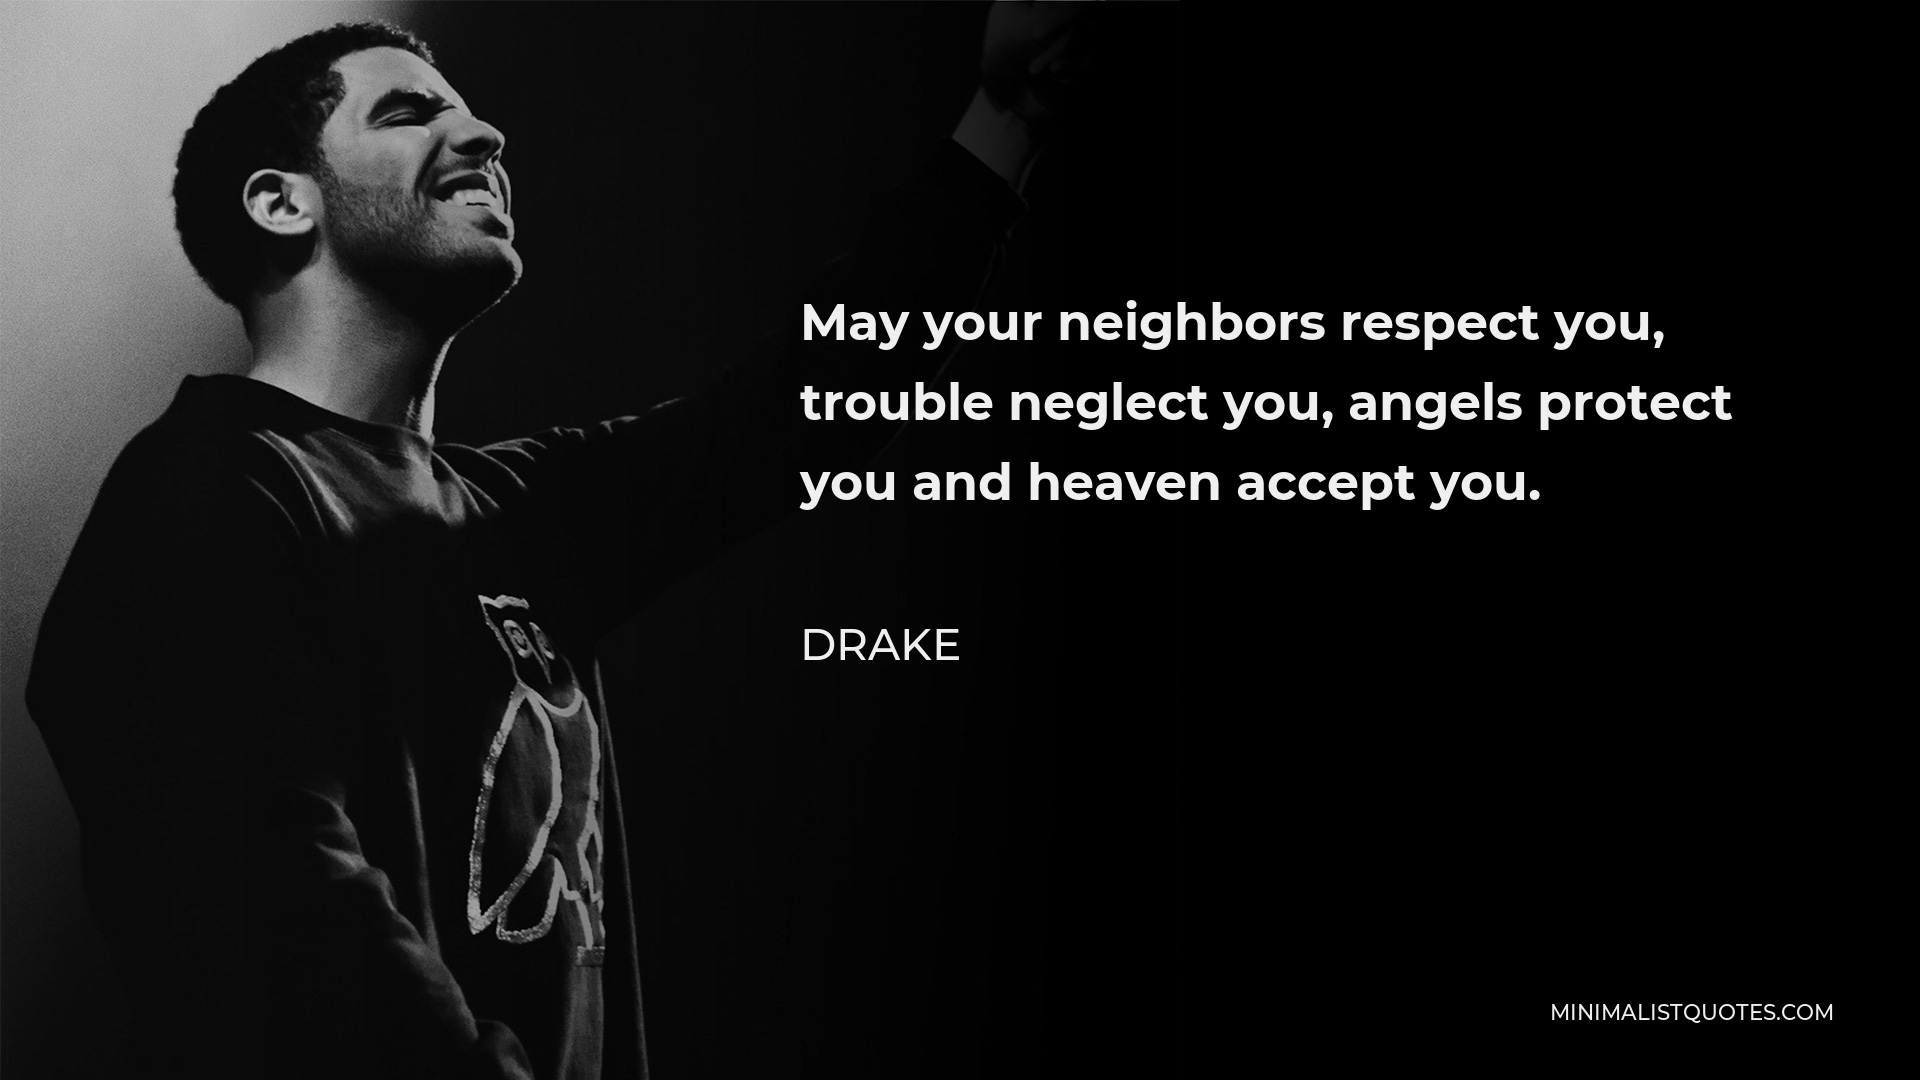 Drake Quote - May your neighbors respect you, trouble neglect you, angels protect you and heaven accept you.